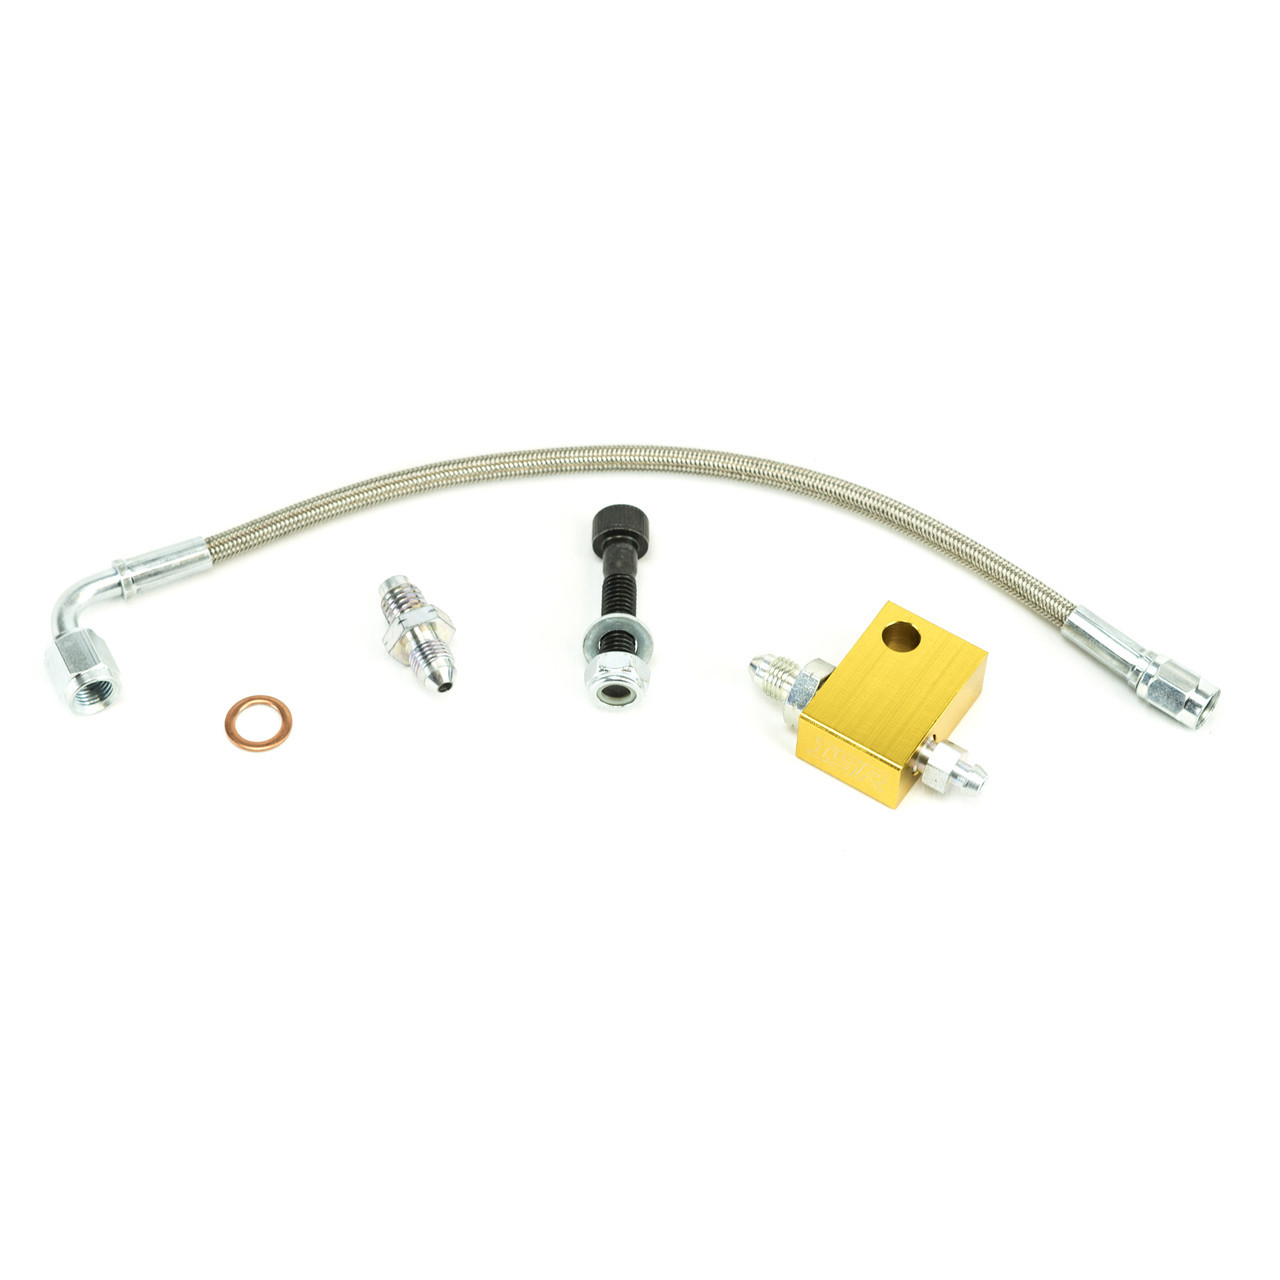 ISR Performance Wilwood Clutch Master Cylinder Conversion Kit with Remote speed bleeder for S13 / S14 with T56